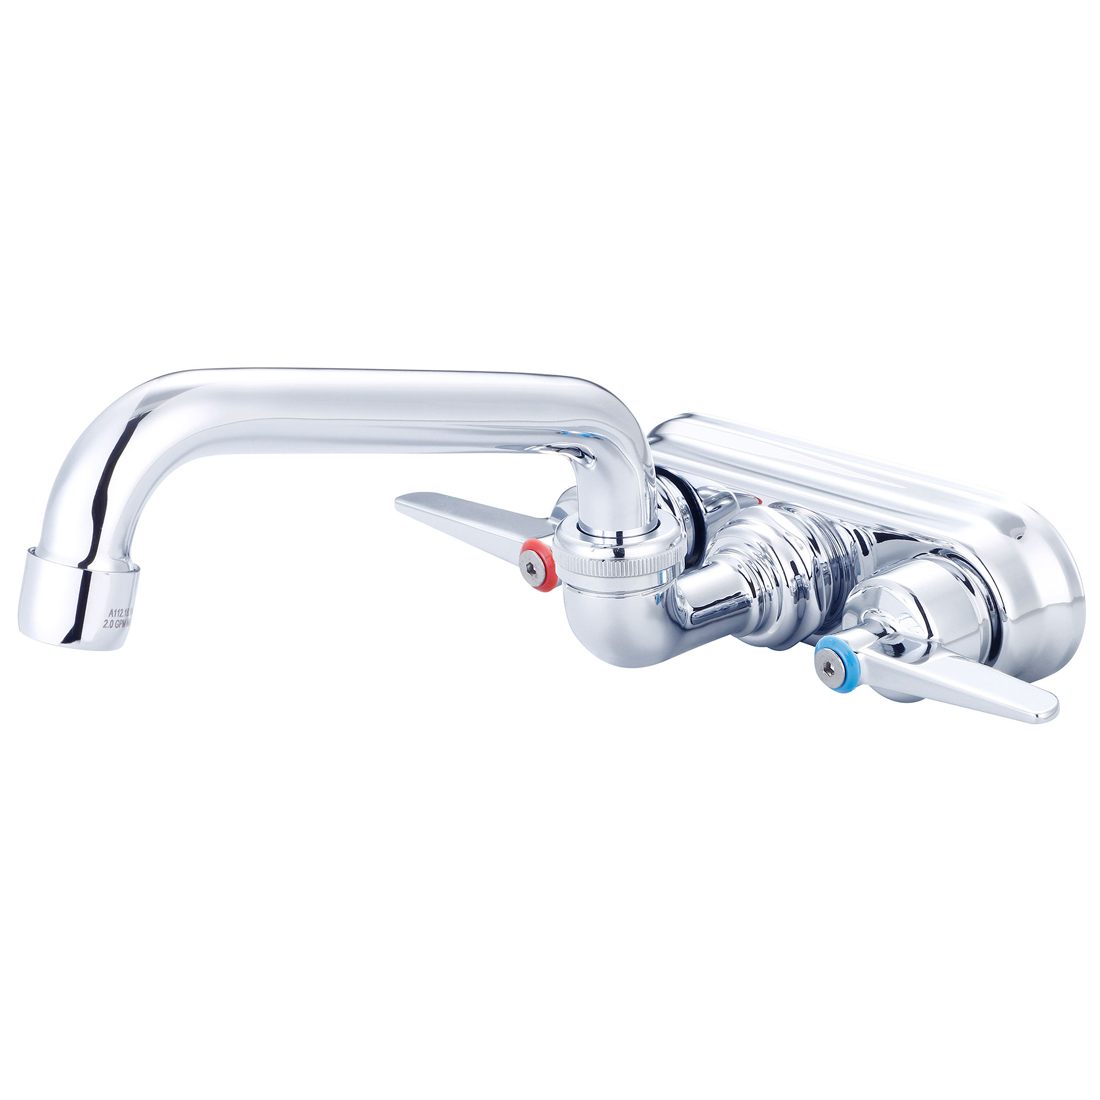 Two Handle Shell Type Wallmount Faucet | Pioneer Industries